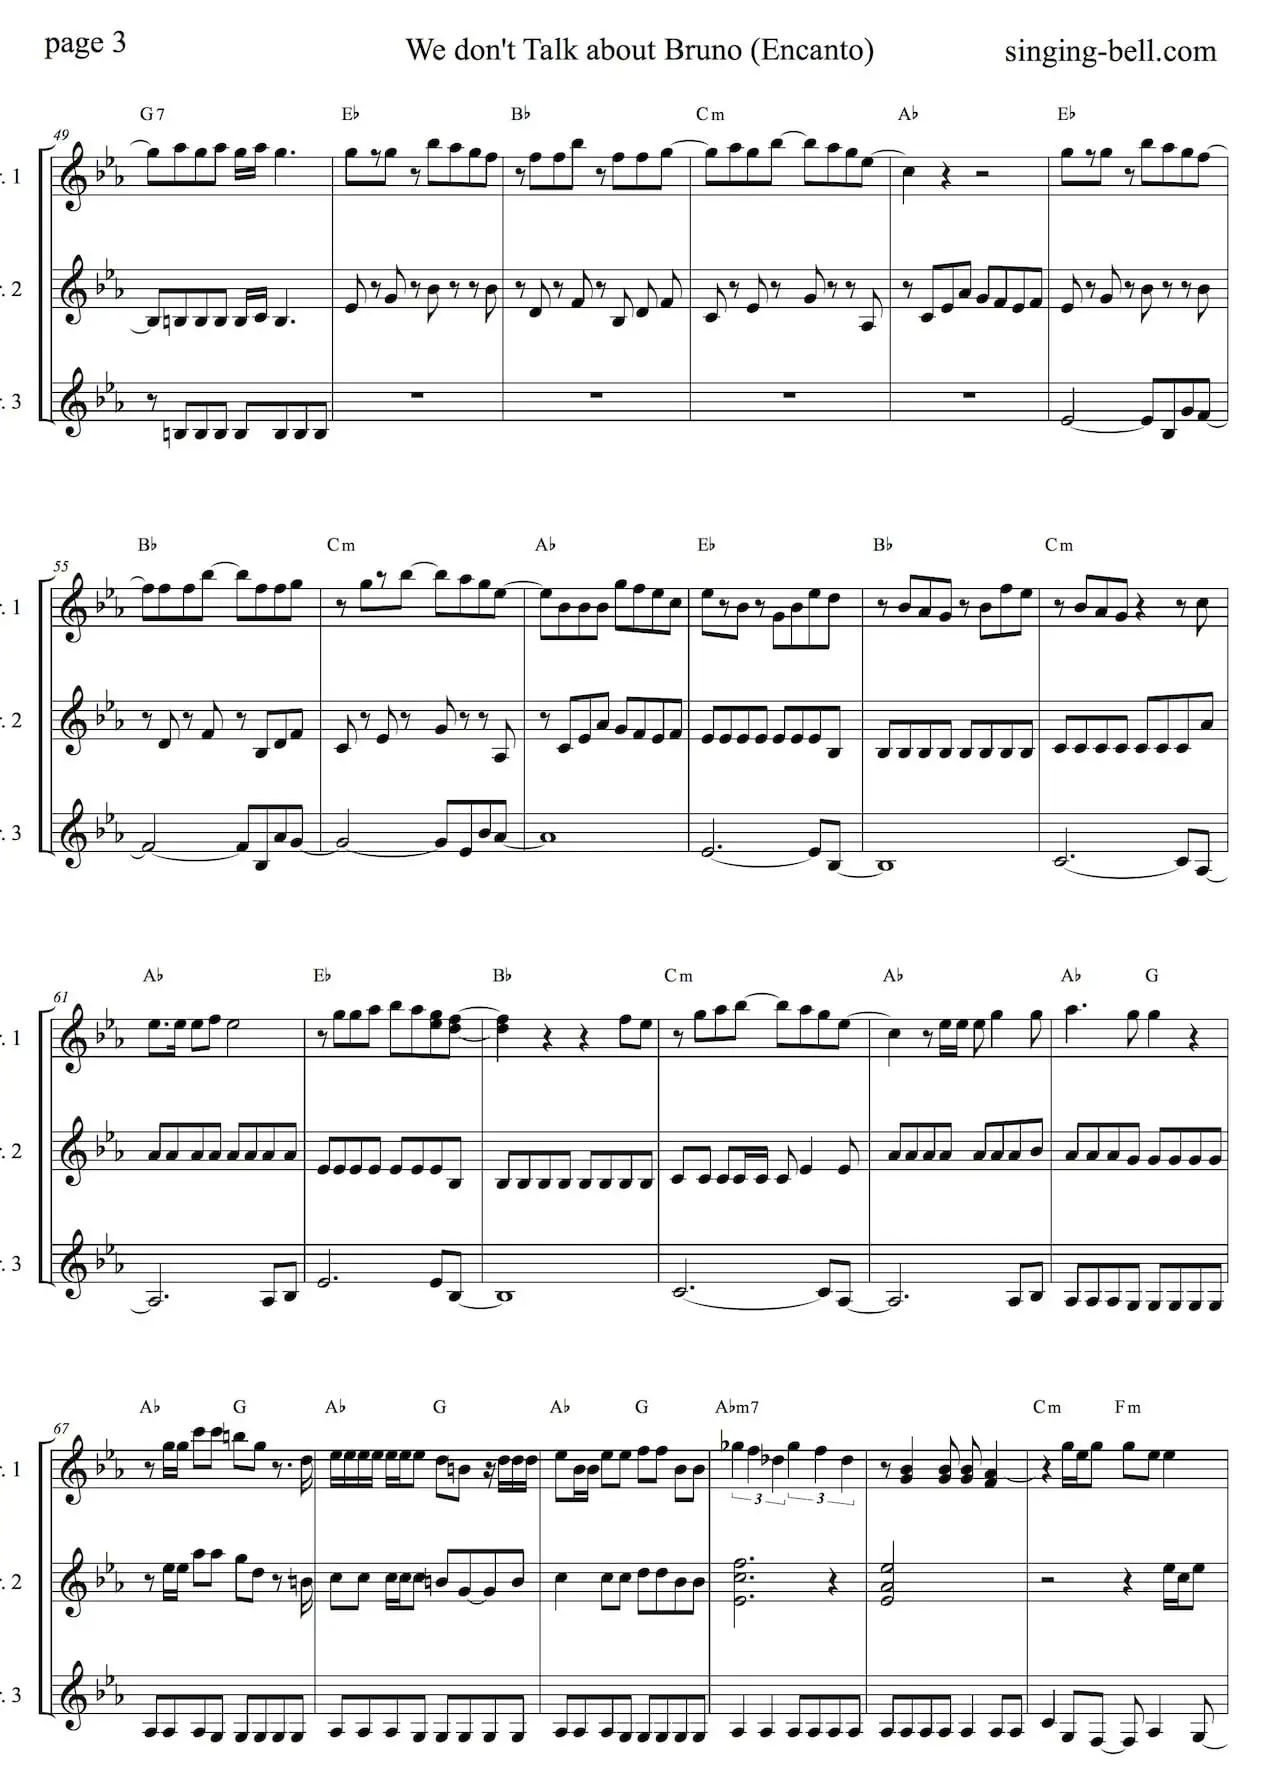 We Don't Talk About Bruno Encanto easy Guitar Trio Sheet Music Notes in Cm - page 3.